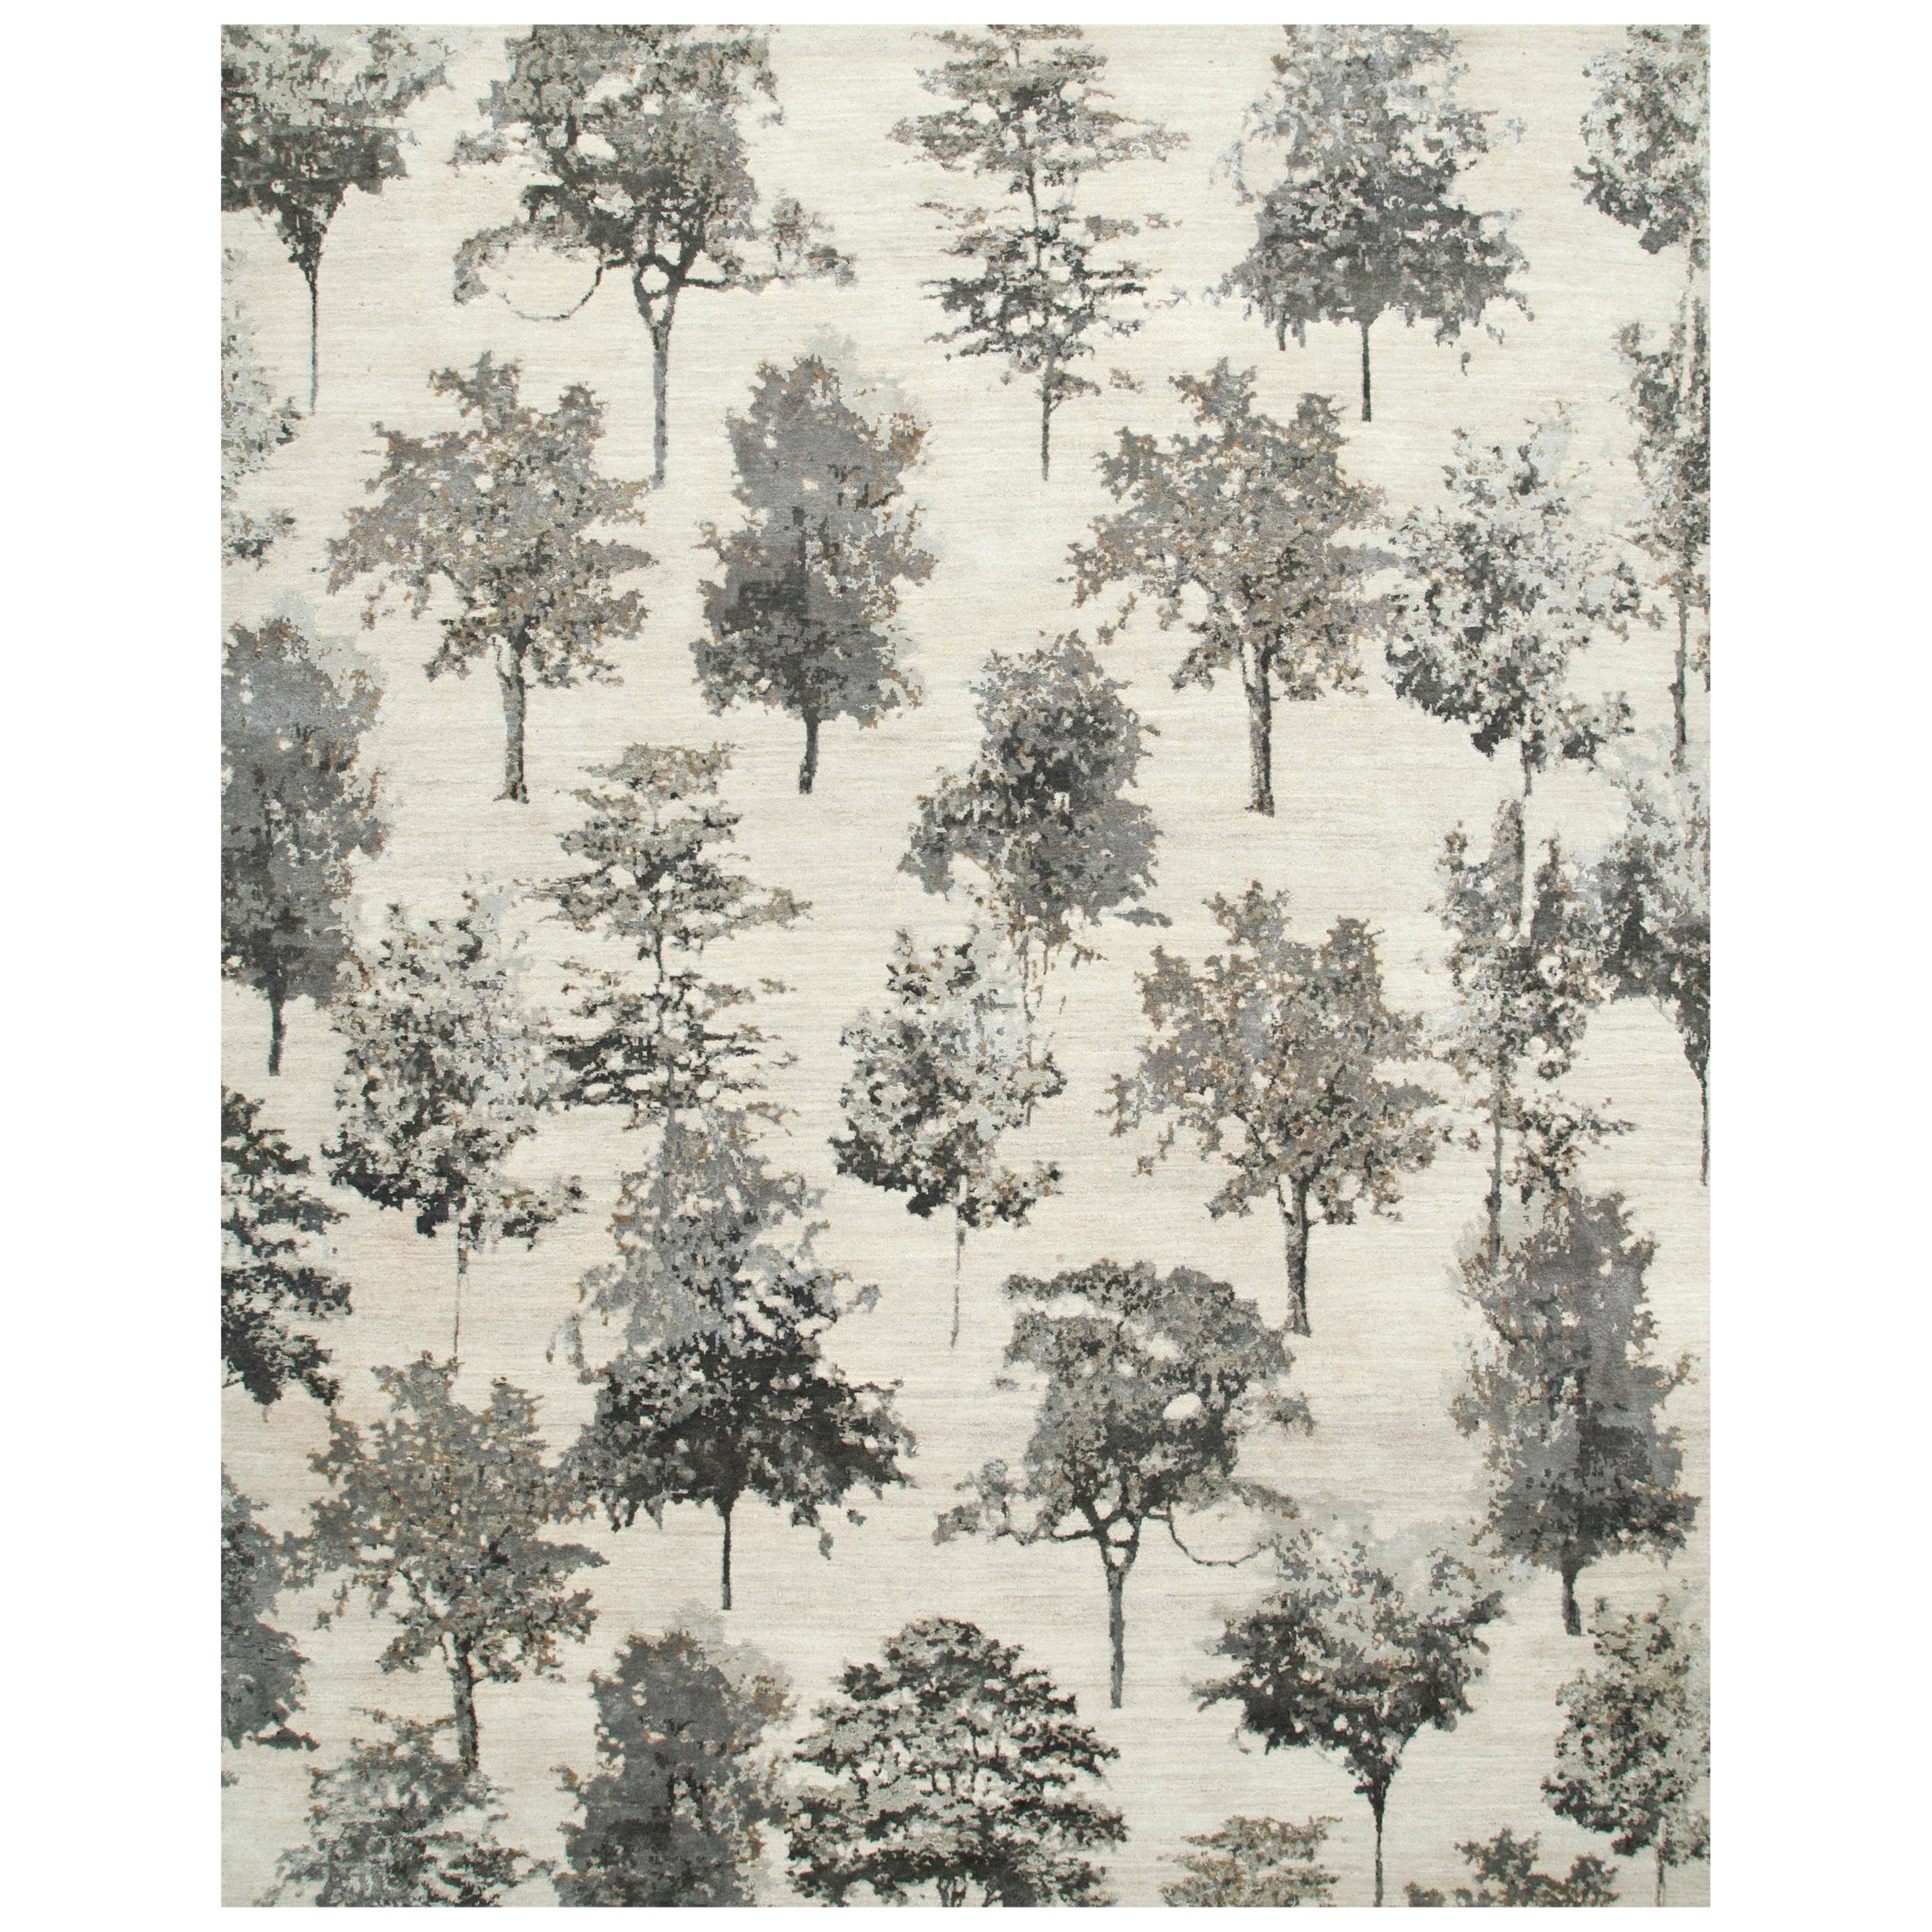  Forest Rug by Rural Weavers, Knotted, Wool, Bamboo Silk, 270x360cm For Sale